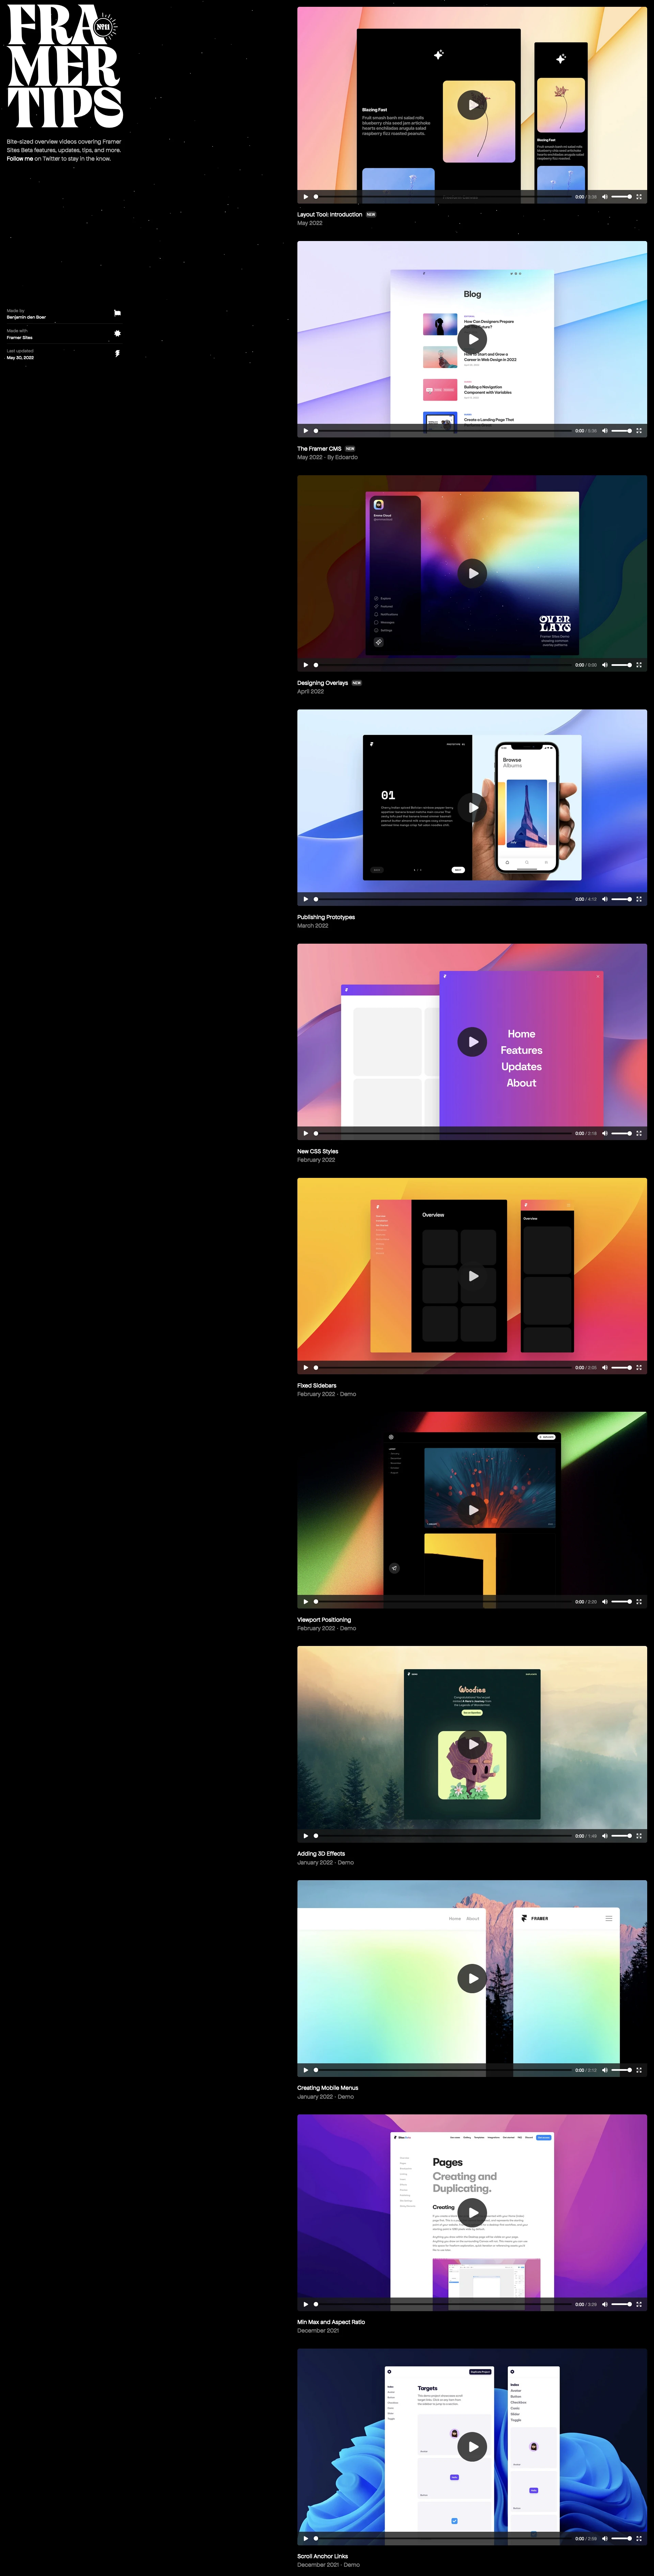 Framer Tips Landing Page Example: Bite-sized overview videos covering Framer Sites features, updates, tips, and more.